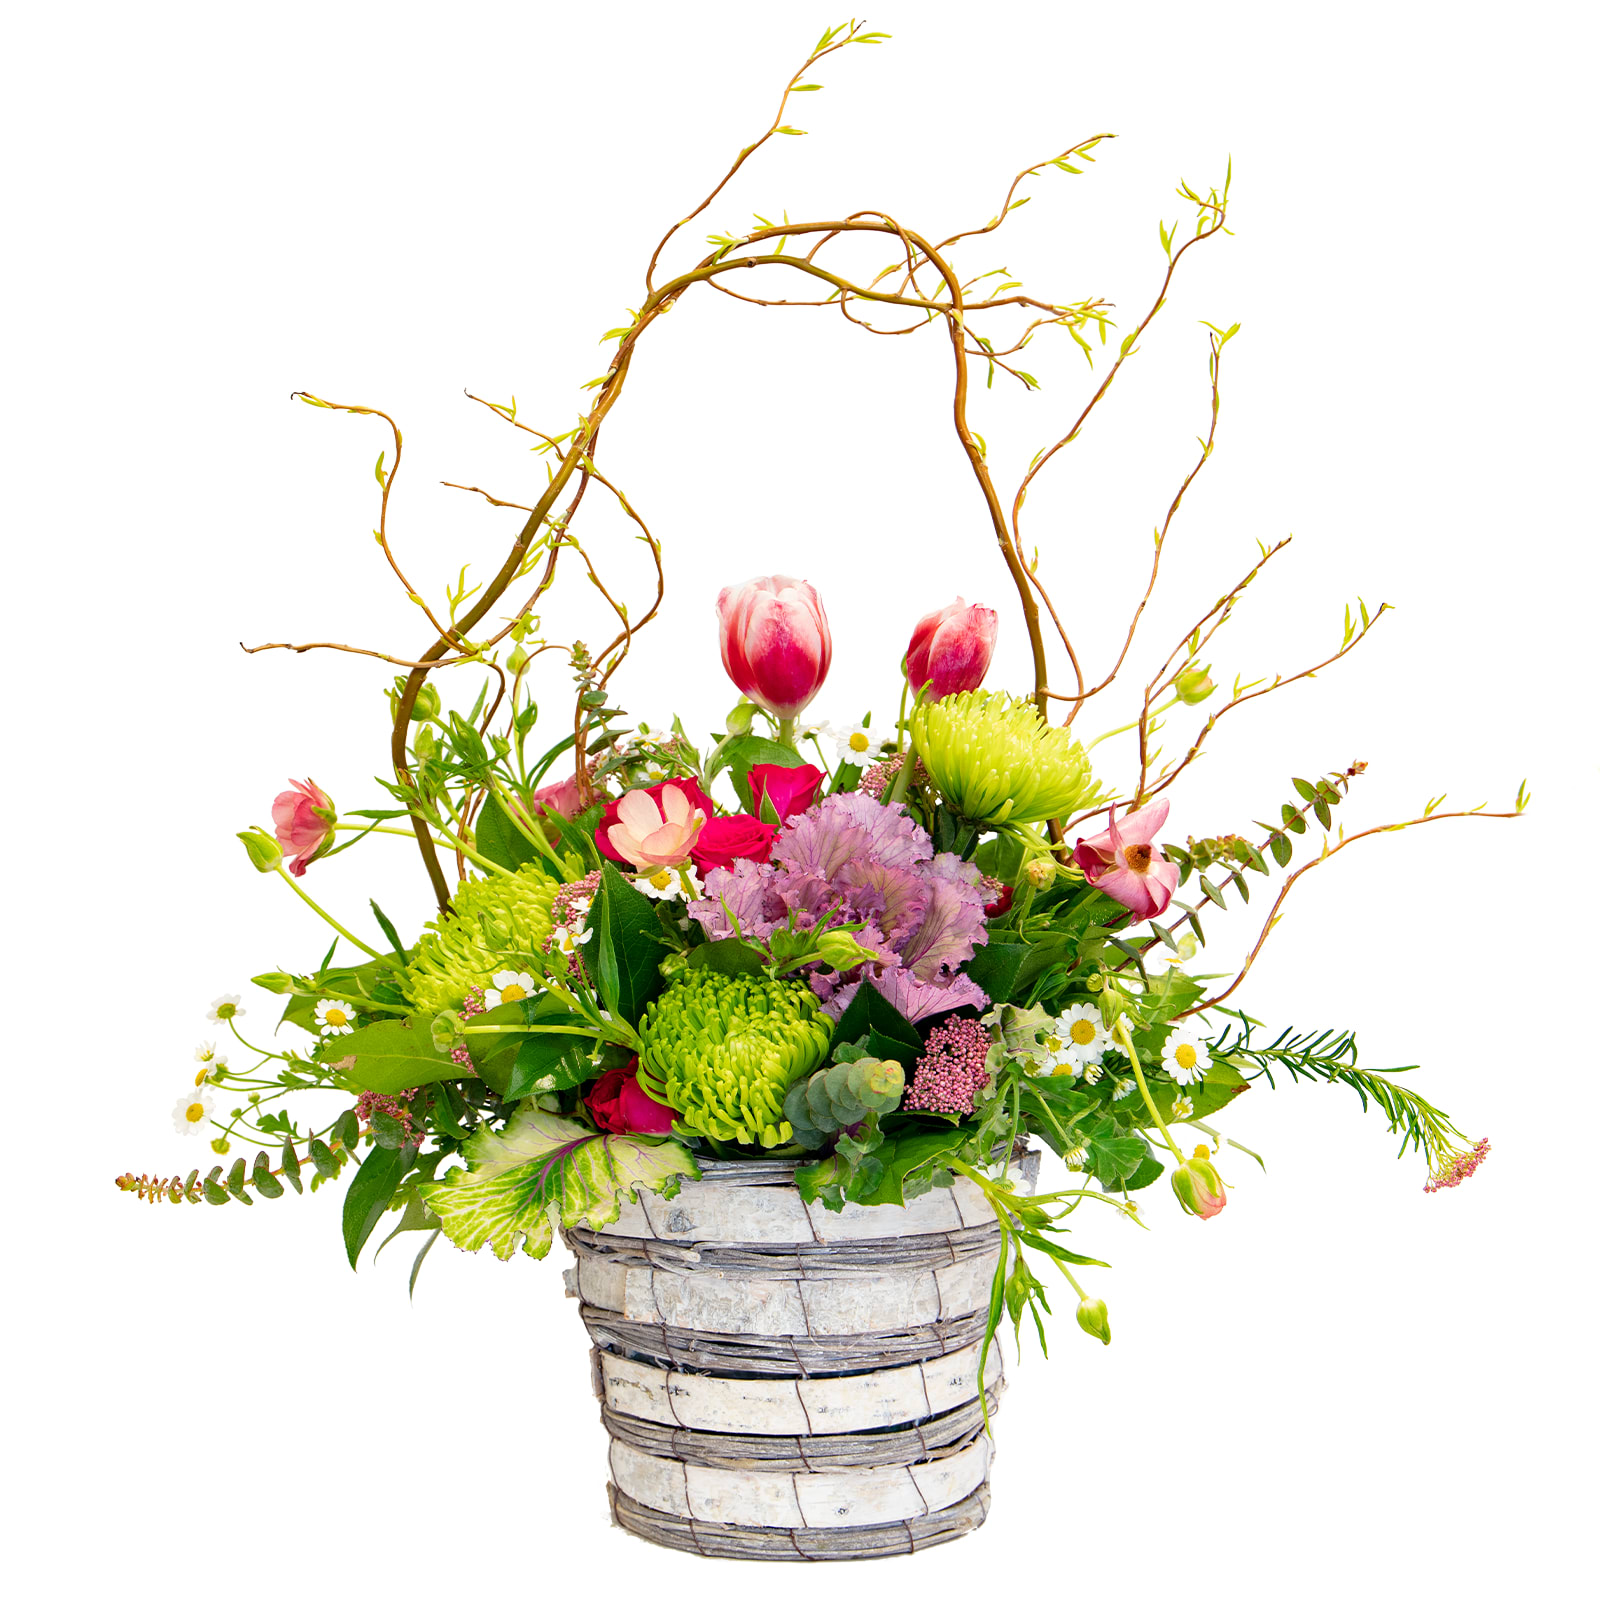 Spring Fleur  - Step into the perfect wildflower garden featuring purple kale &amp; chamomile for our Easter Special. Arranged in beautiful birch and a hand-curled willow to create this one of a kind basket for the season. 